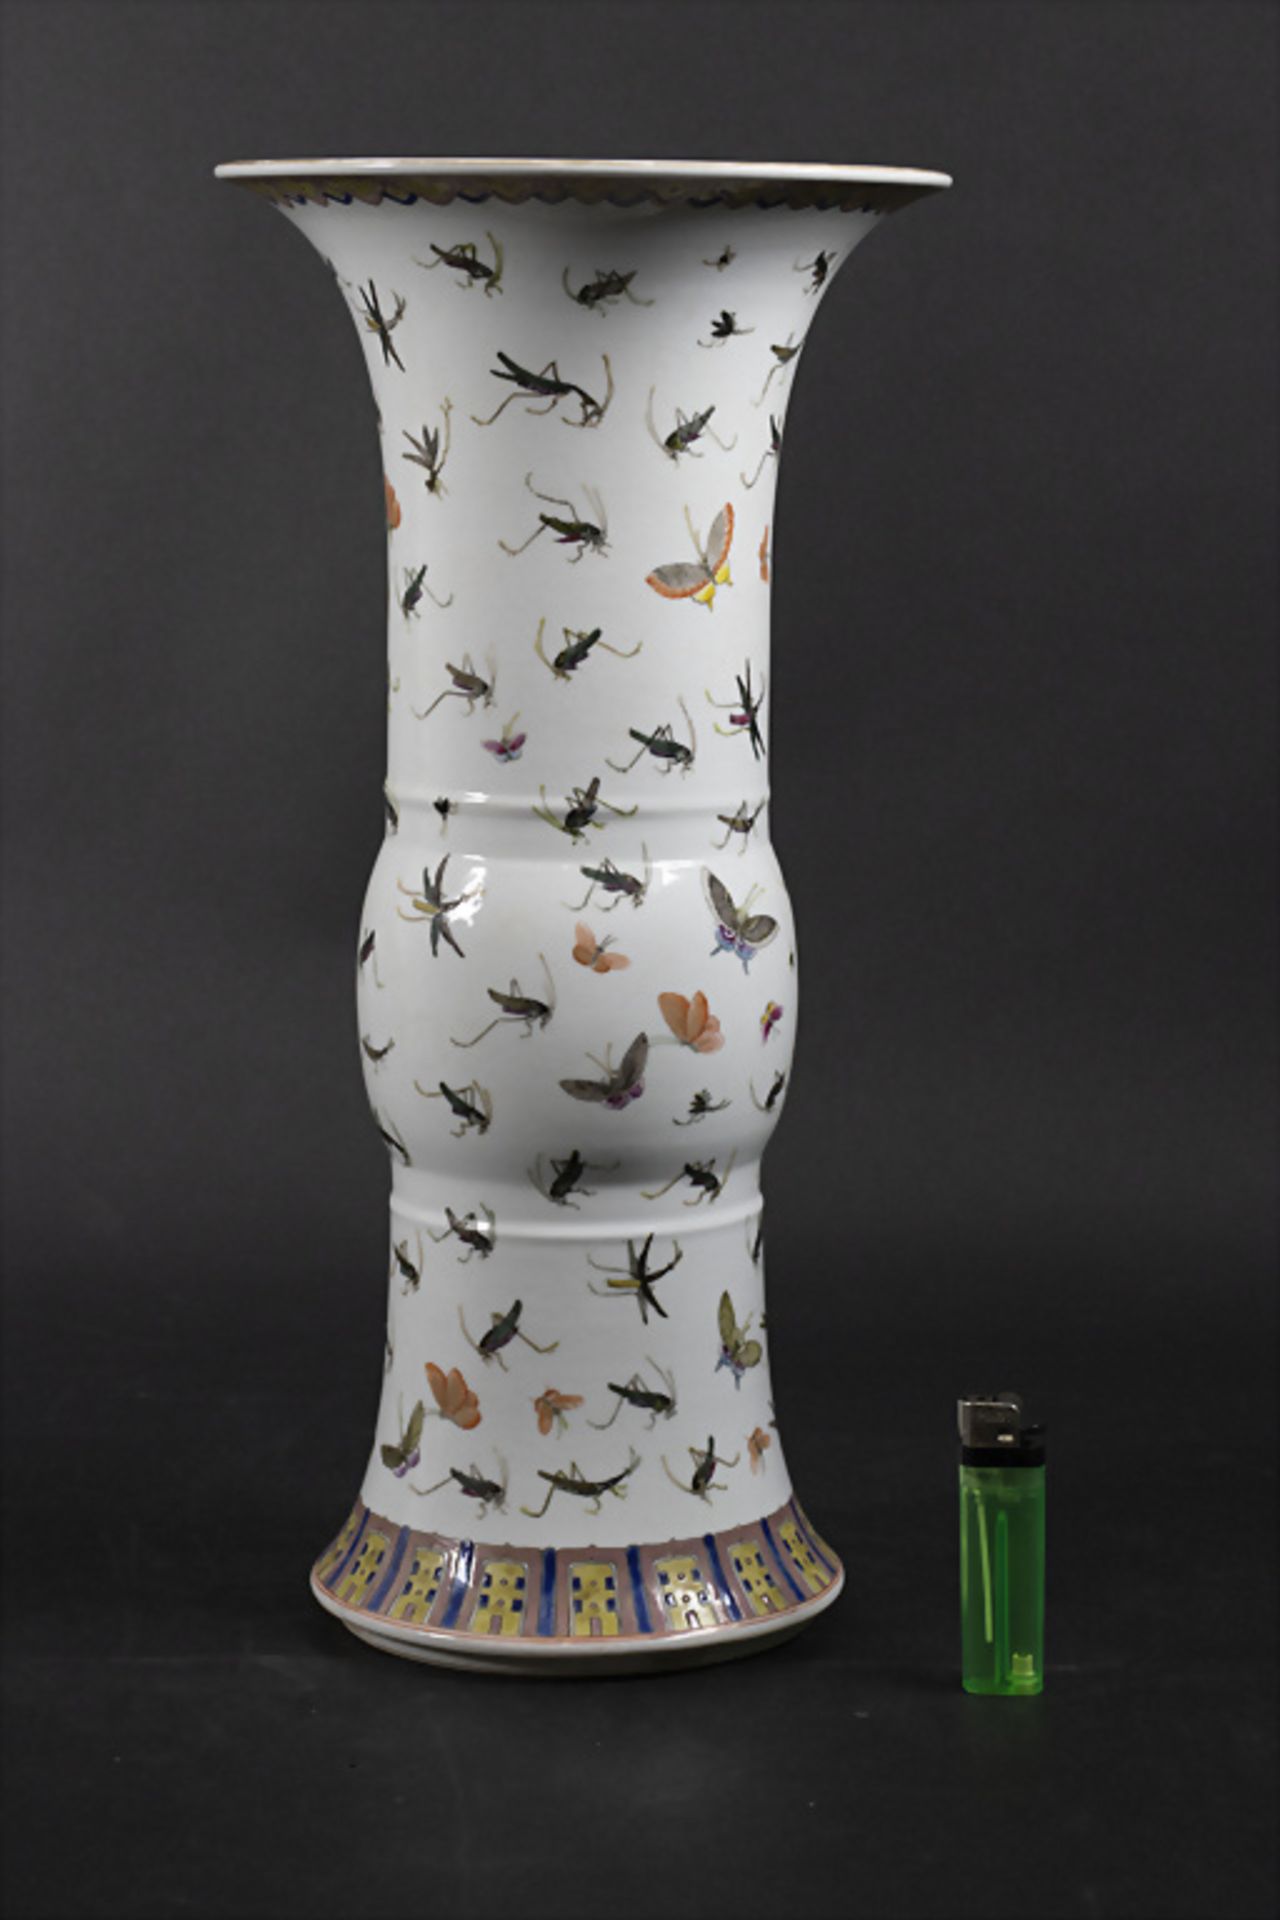 Porzellanvase mit Insekten in Gu Form / A GU shaped porcelain vase wih insects, China, 19./20. Jh. - Image 2 of 9